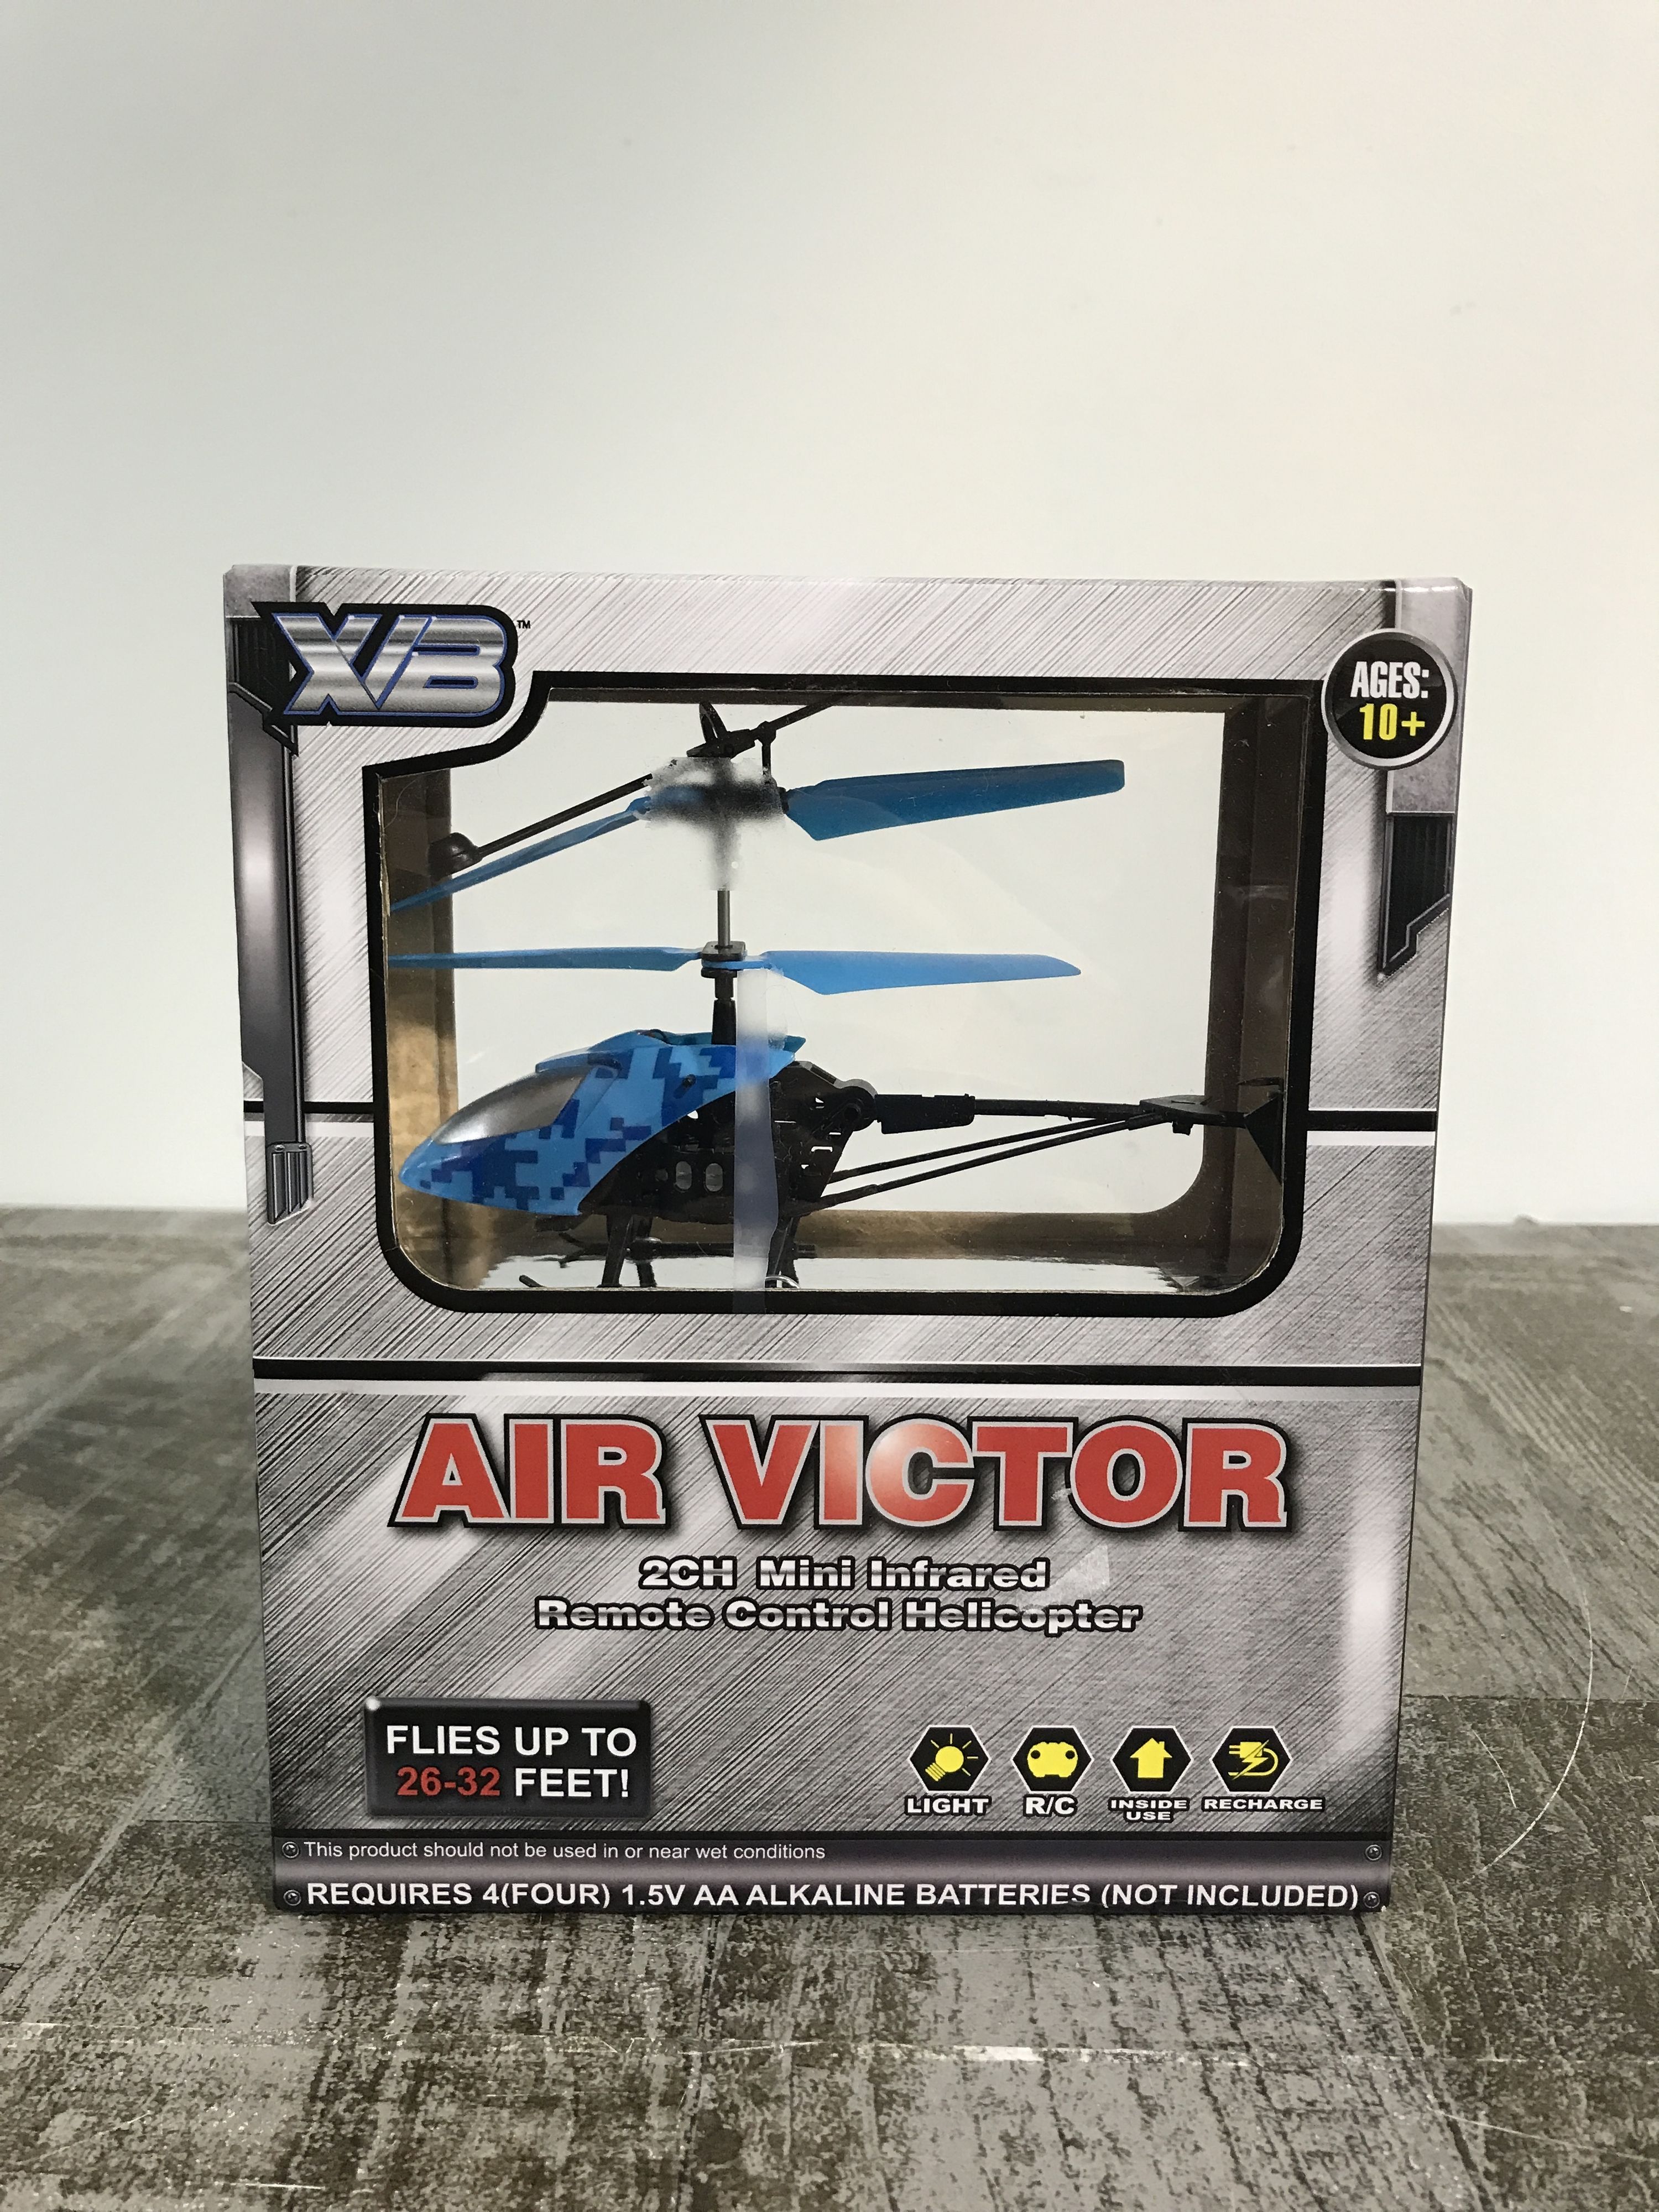 Air Victor 2ch I/r Mini Infrared Remote Control Helicopter - New in Box